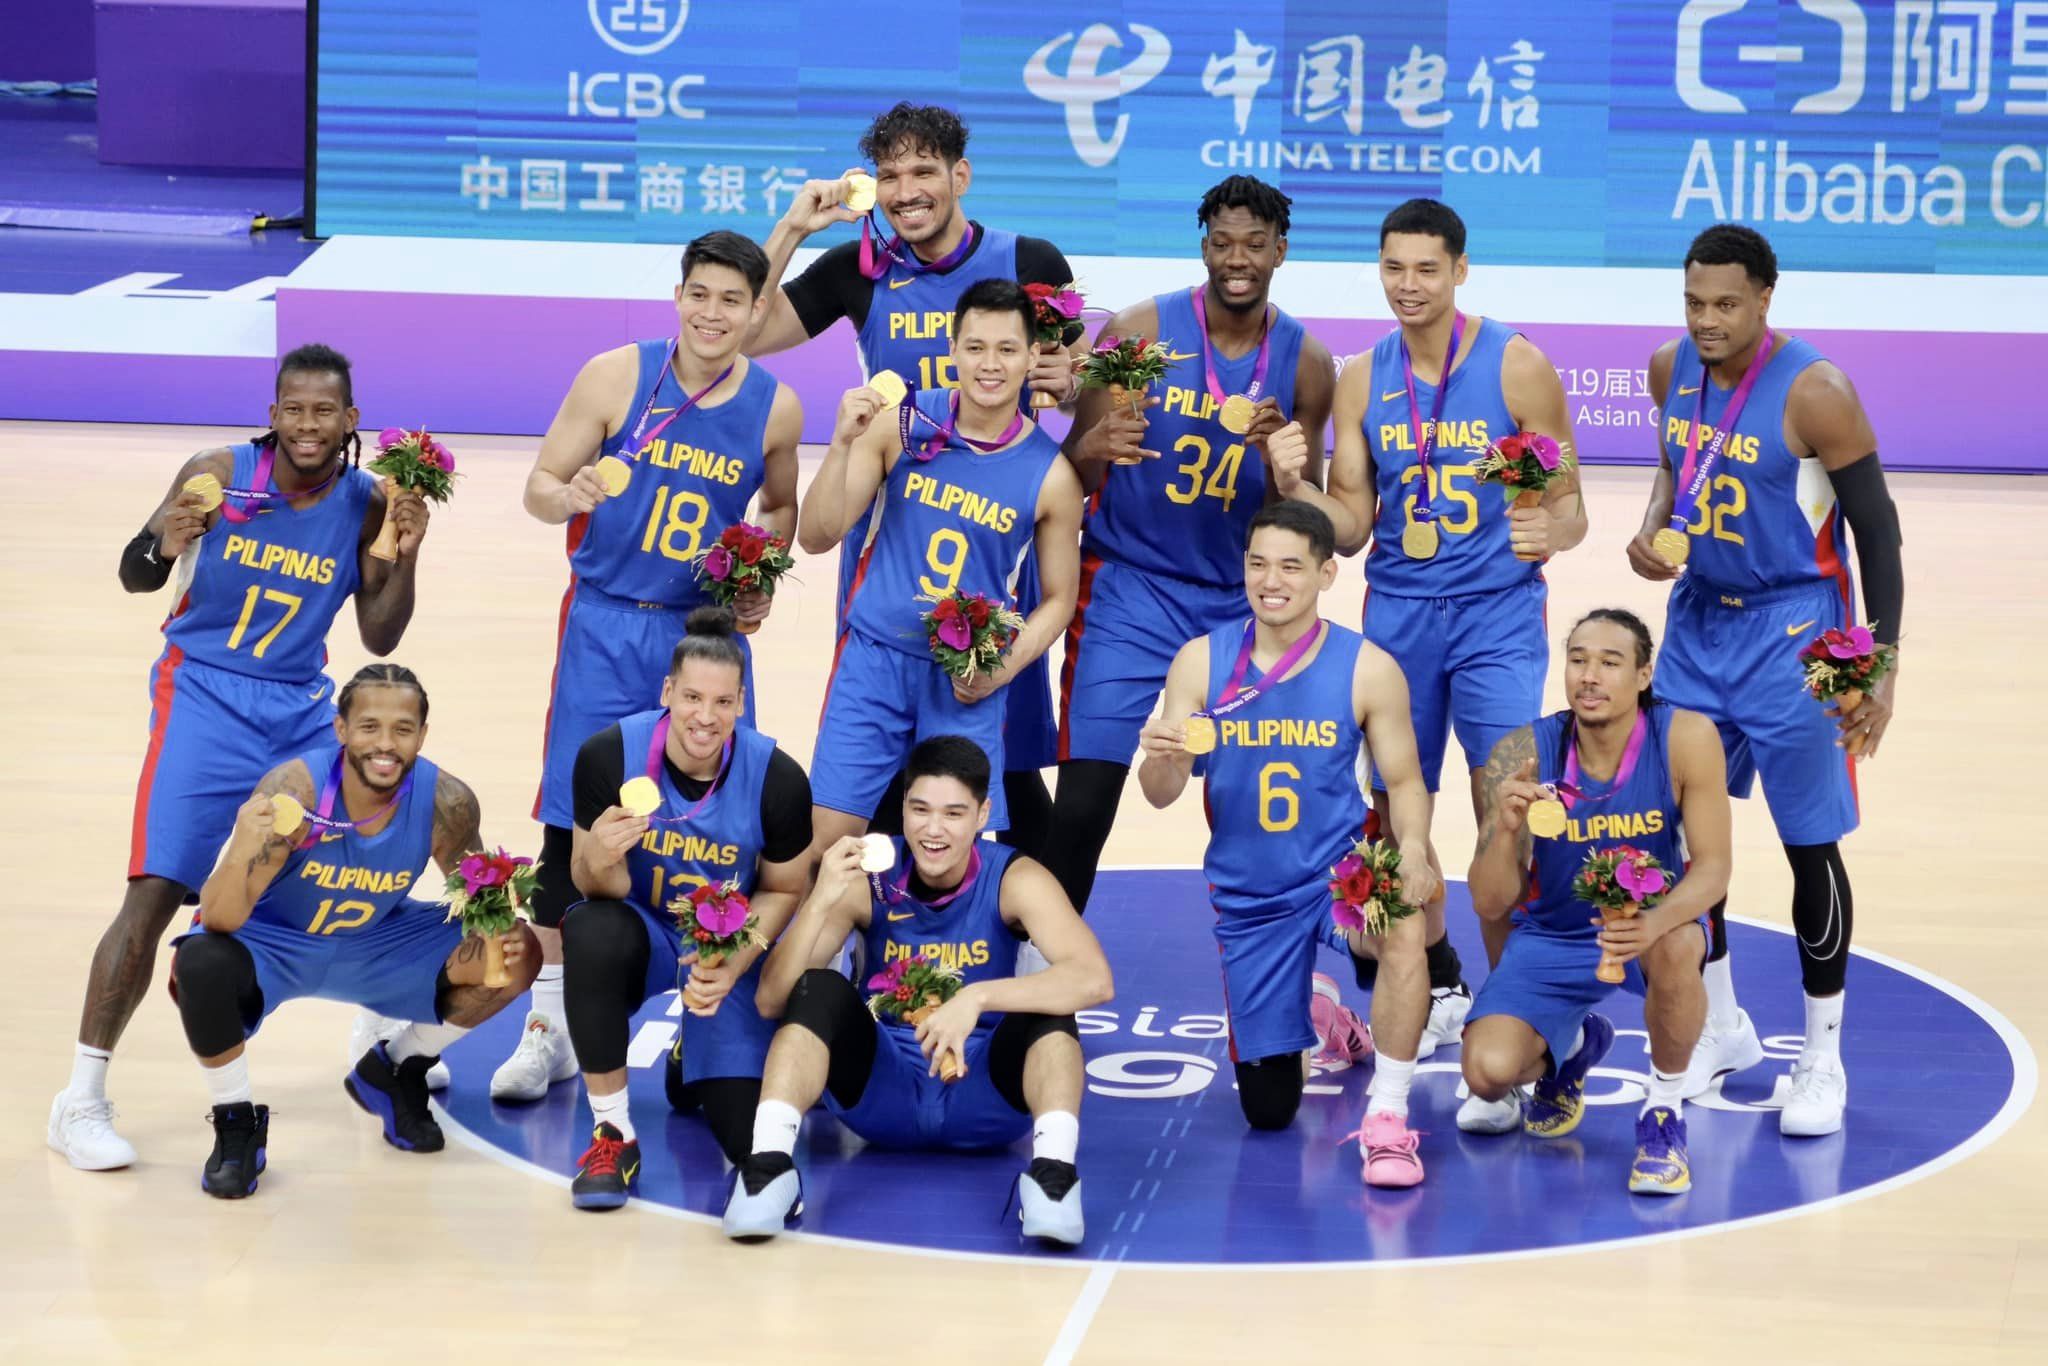 Gold medalists for the Philippines at the 19th Asian Games in China: Gilas Pilipinas (men's basketball)